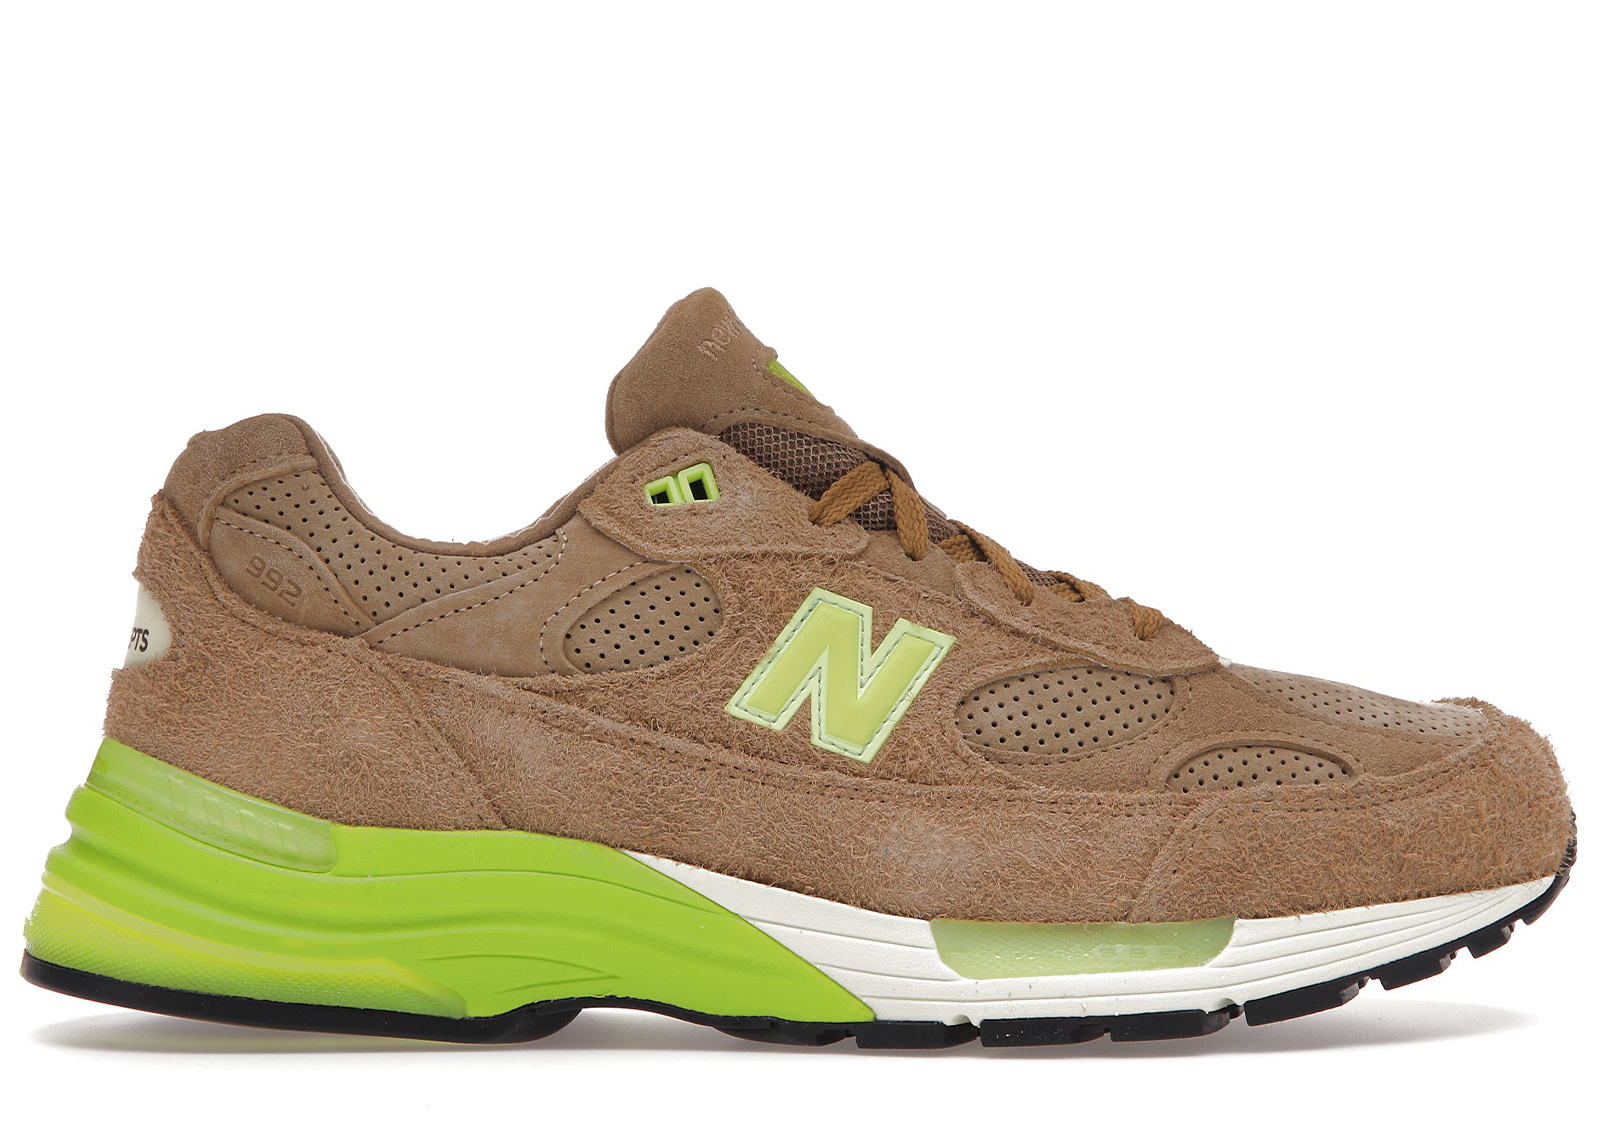 New Balance 992 Concepts Low Hanging Fruit